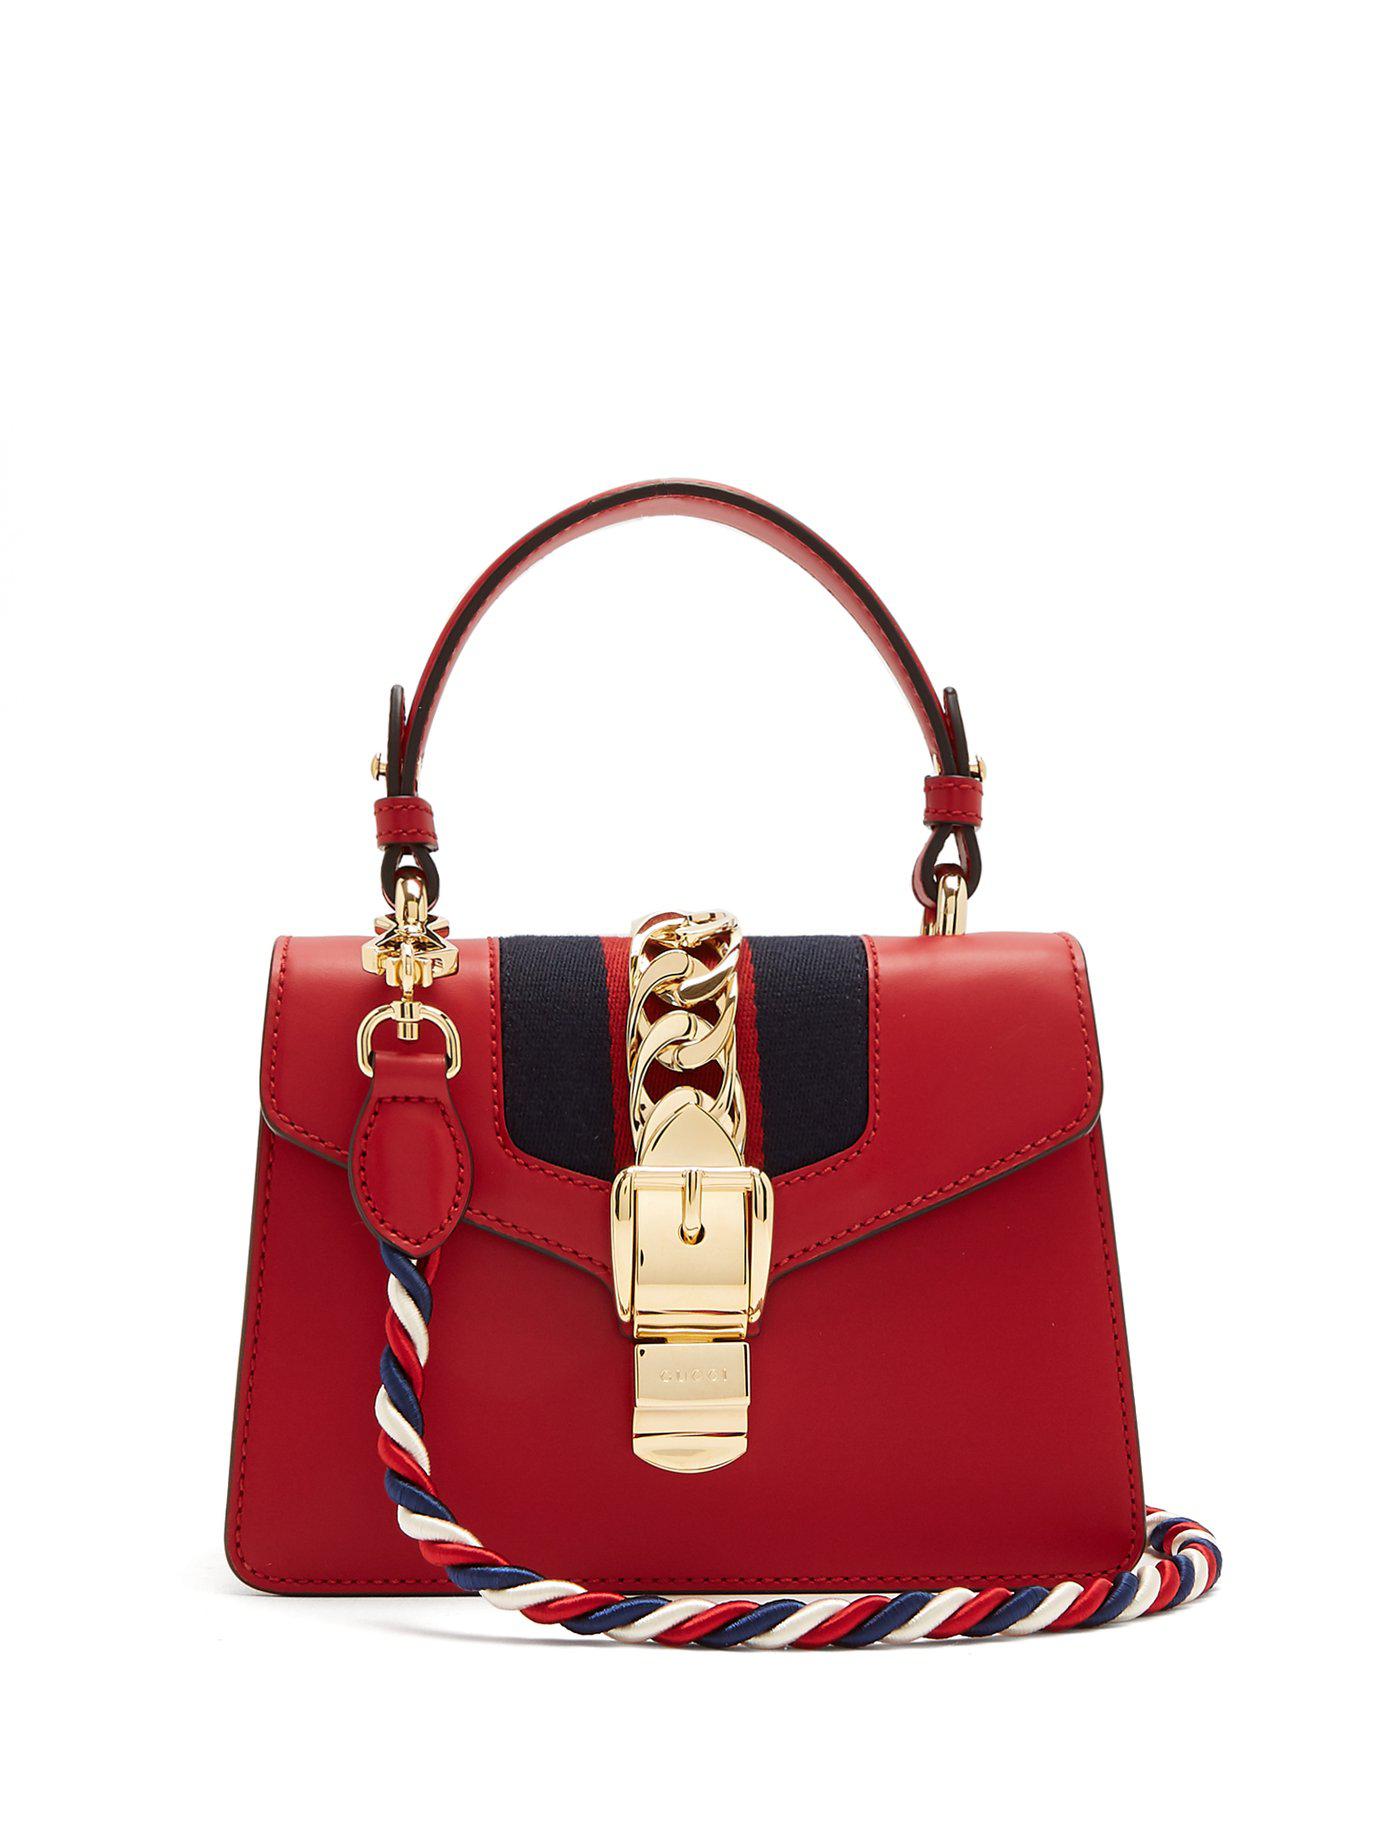 Lyst - Gucci Sylvie Mini Leather Shoulder Bag in Red - Save 19.